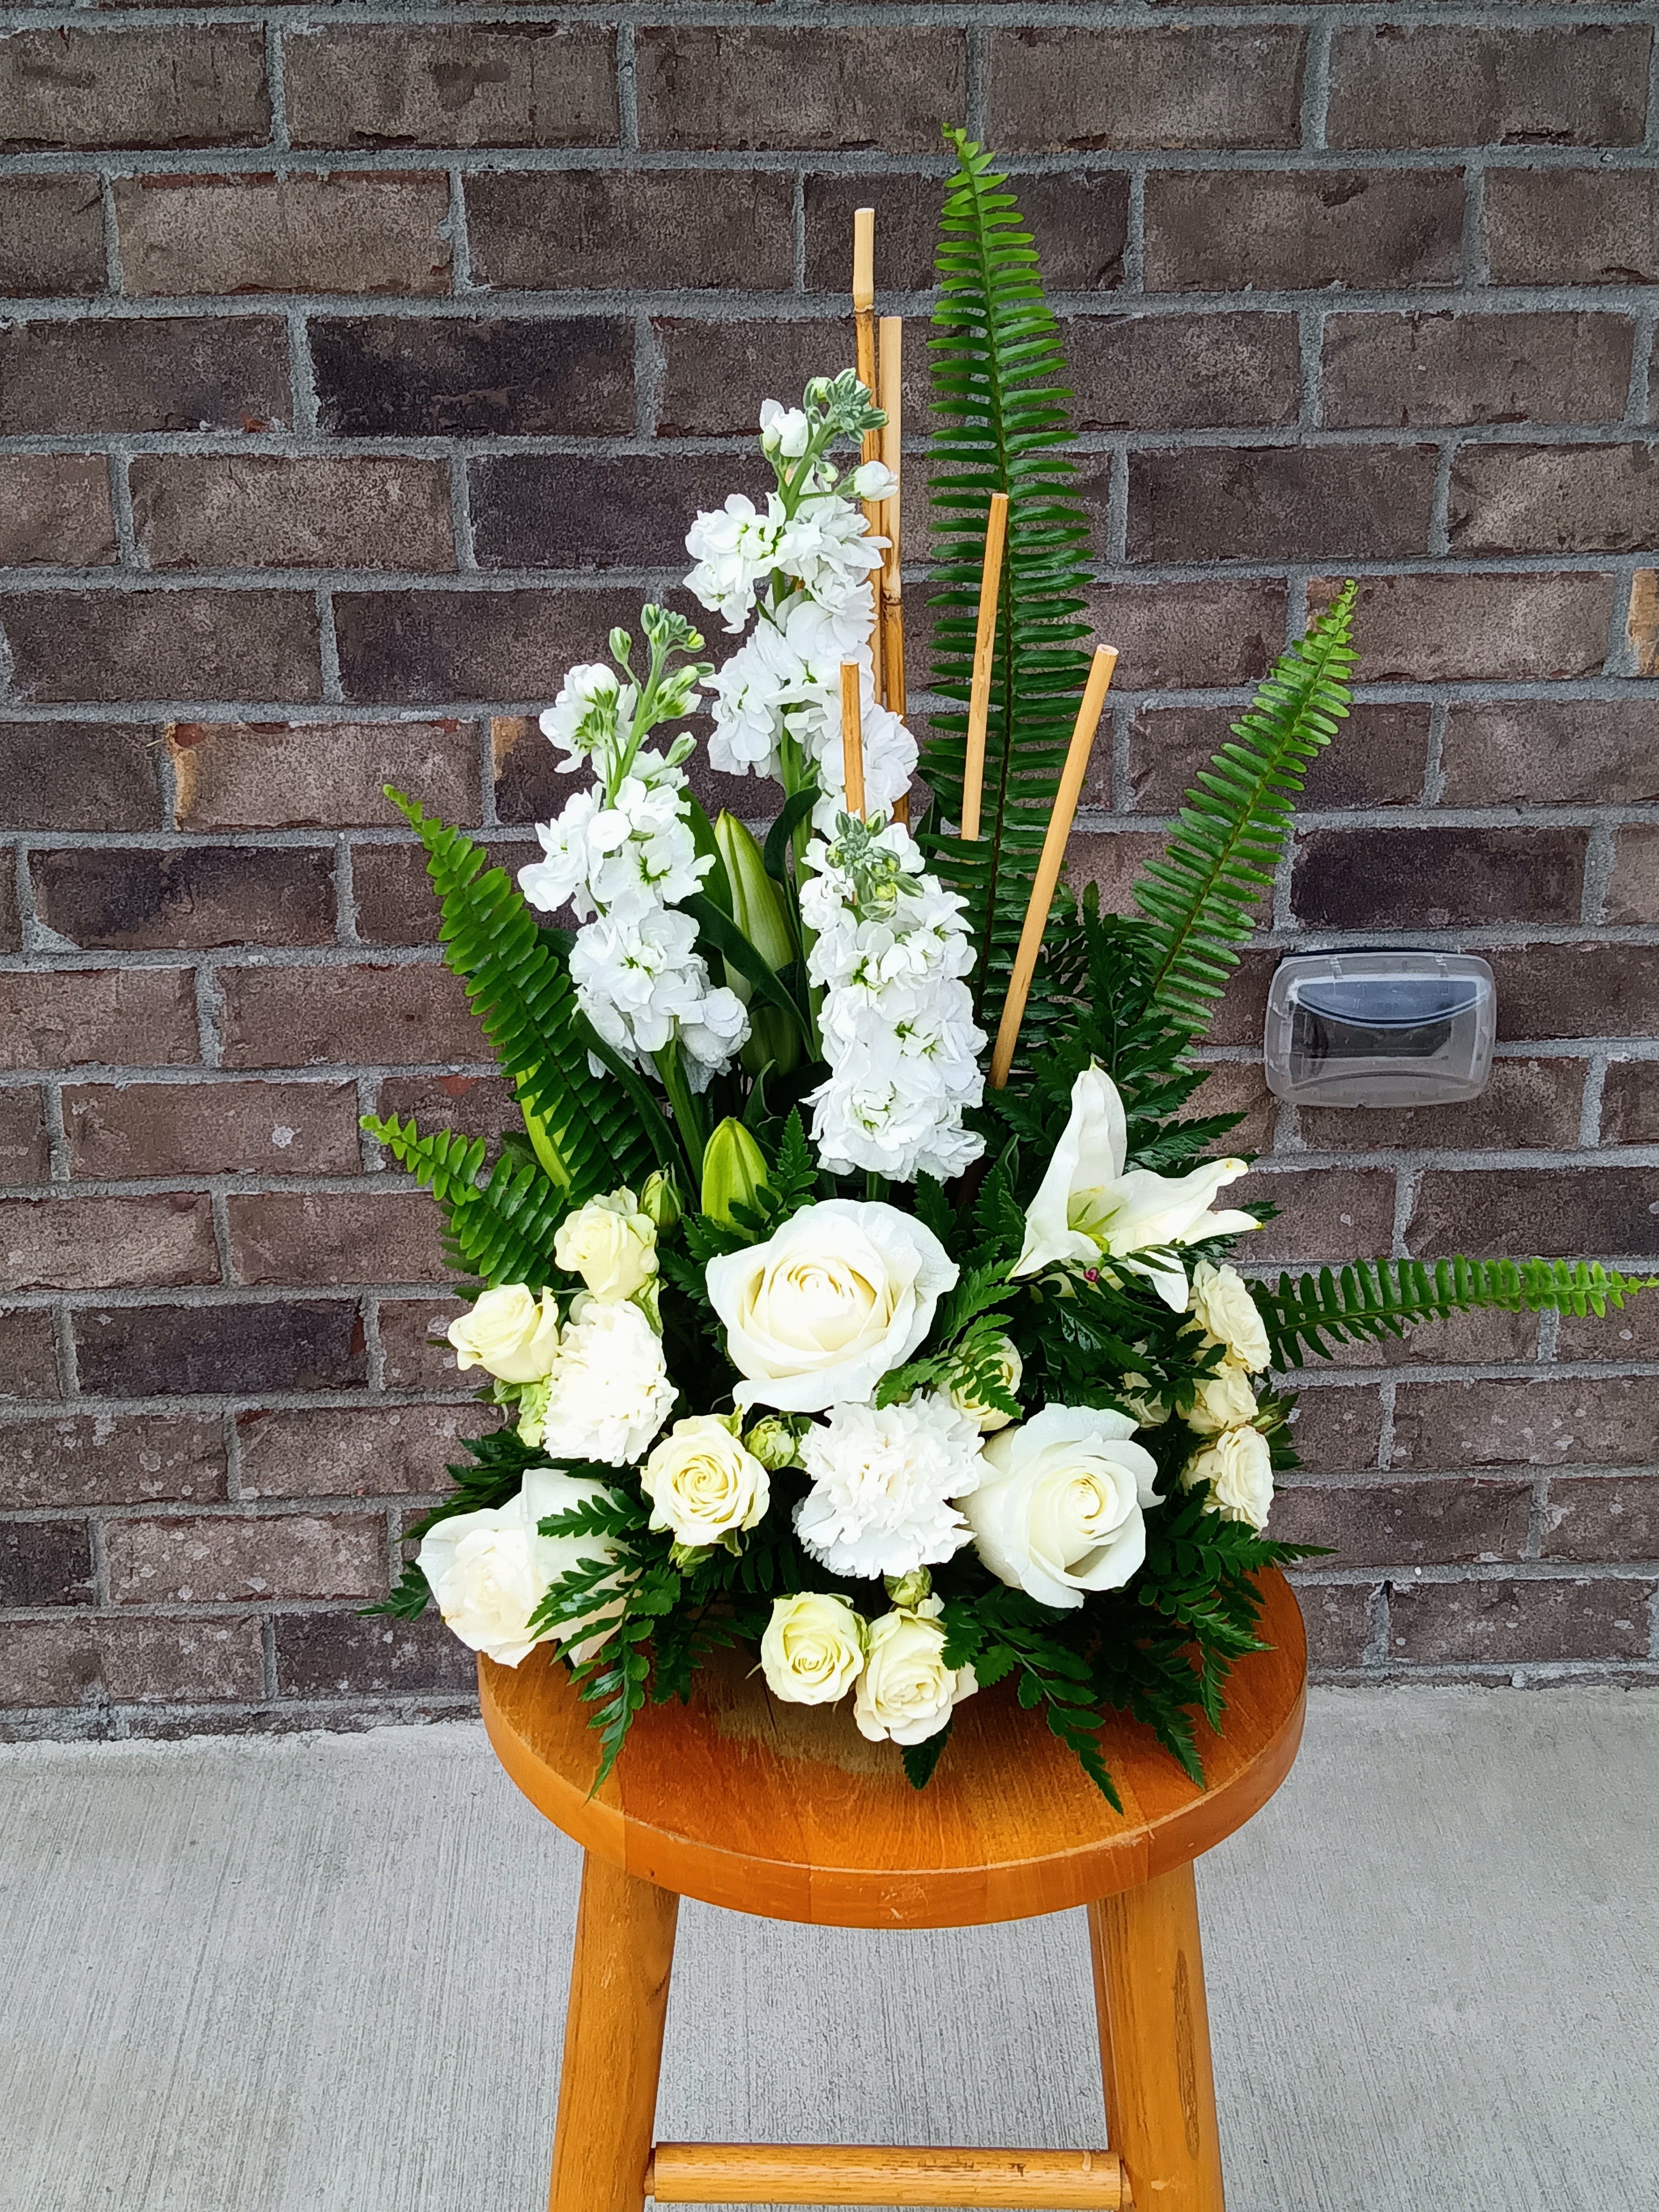 Heaven's Hope - An all-white arrangement filled with various blooms.